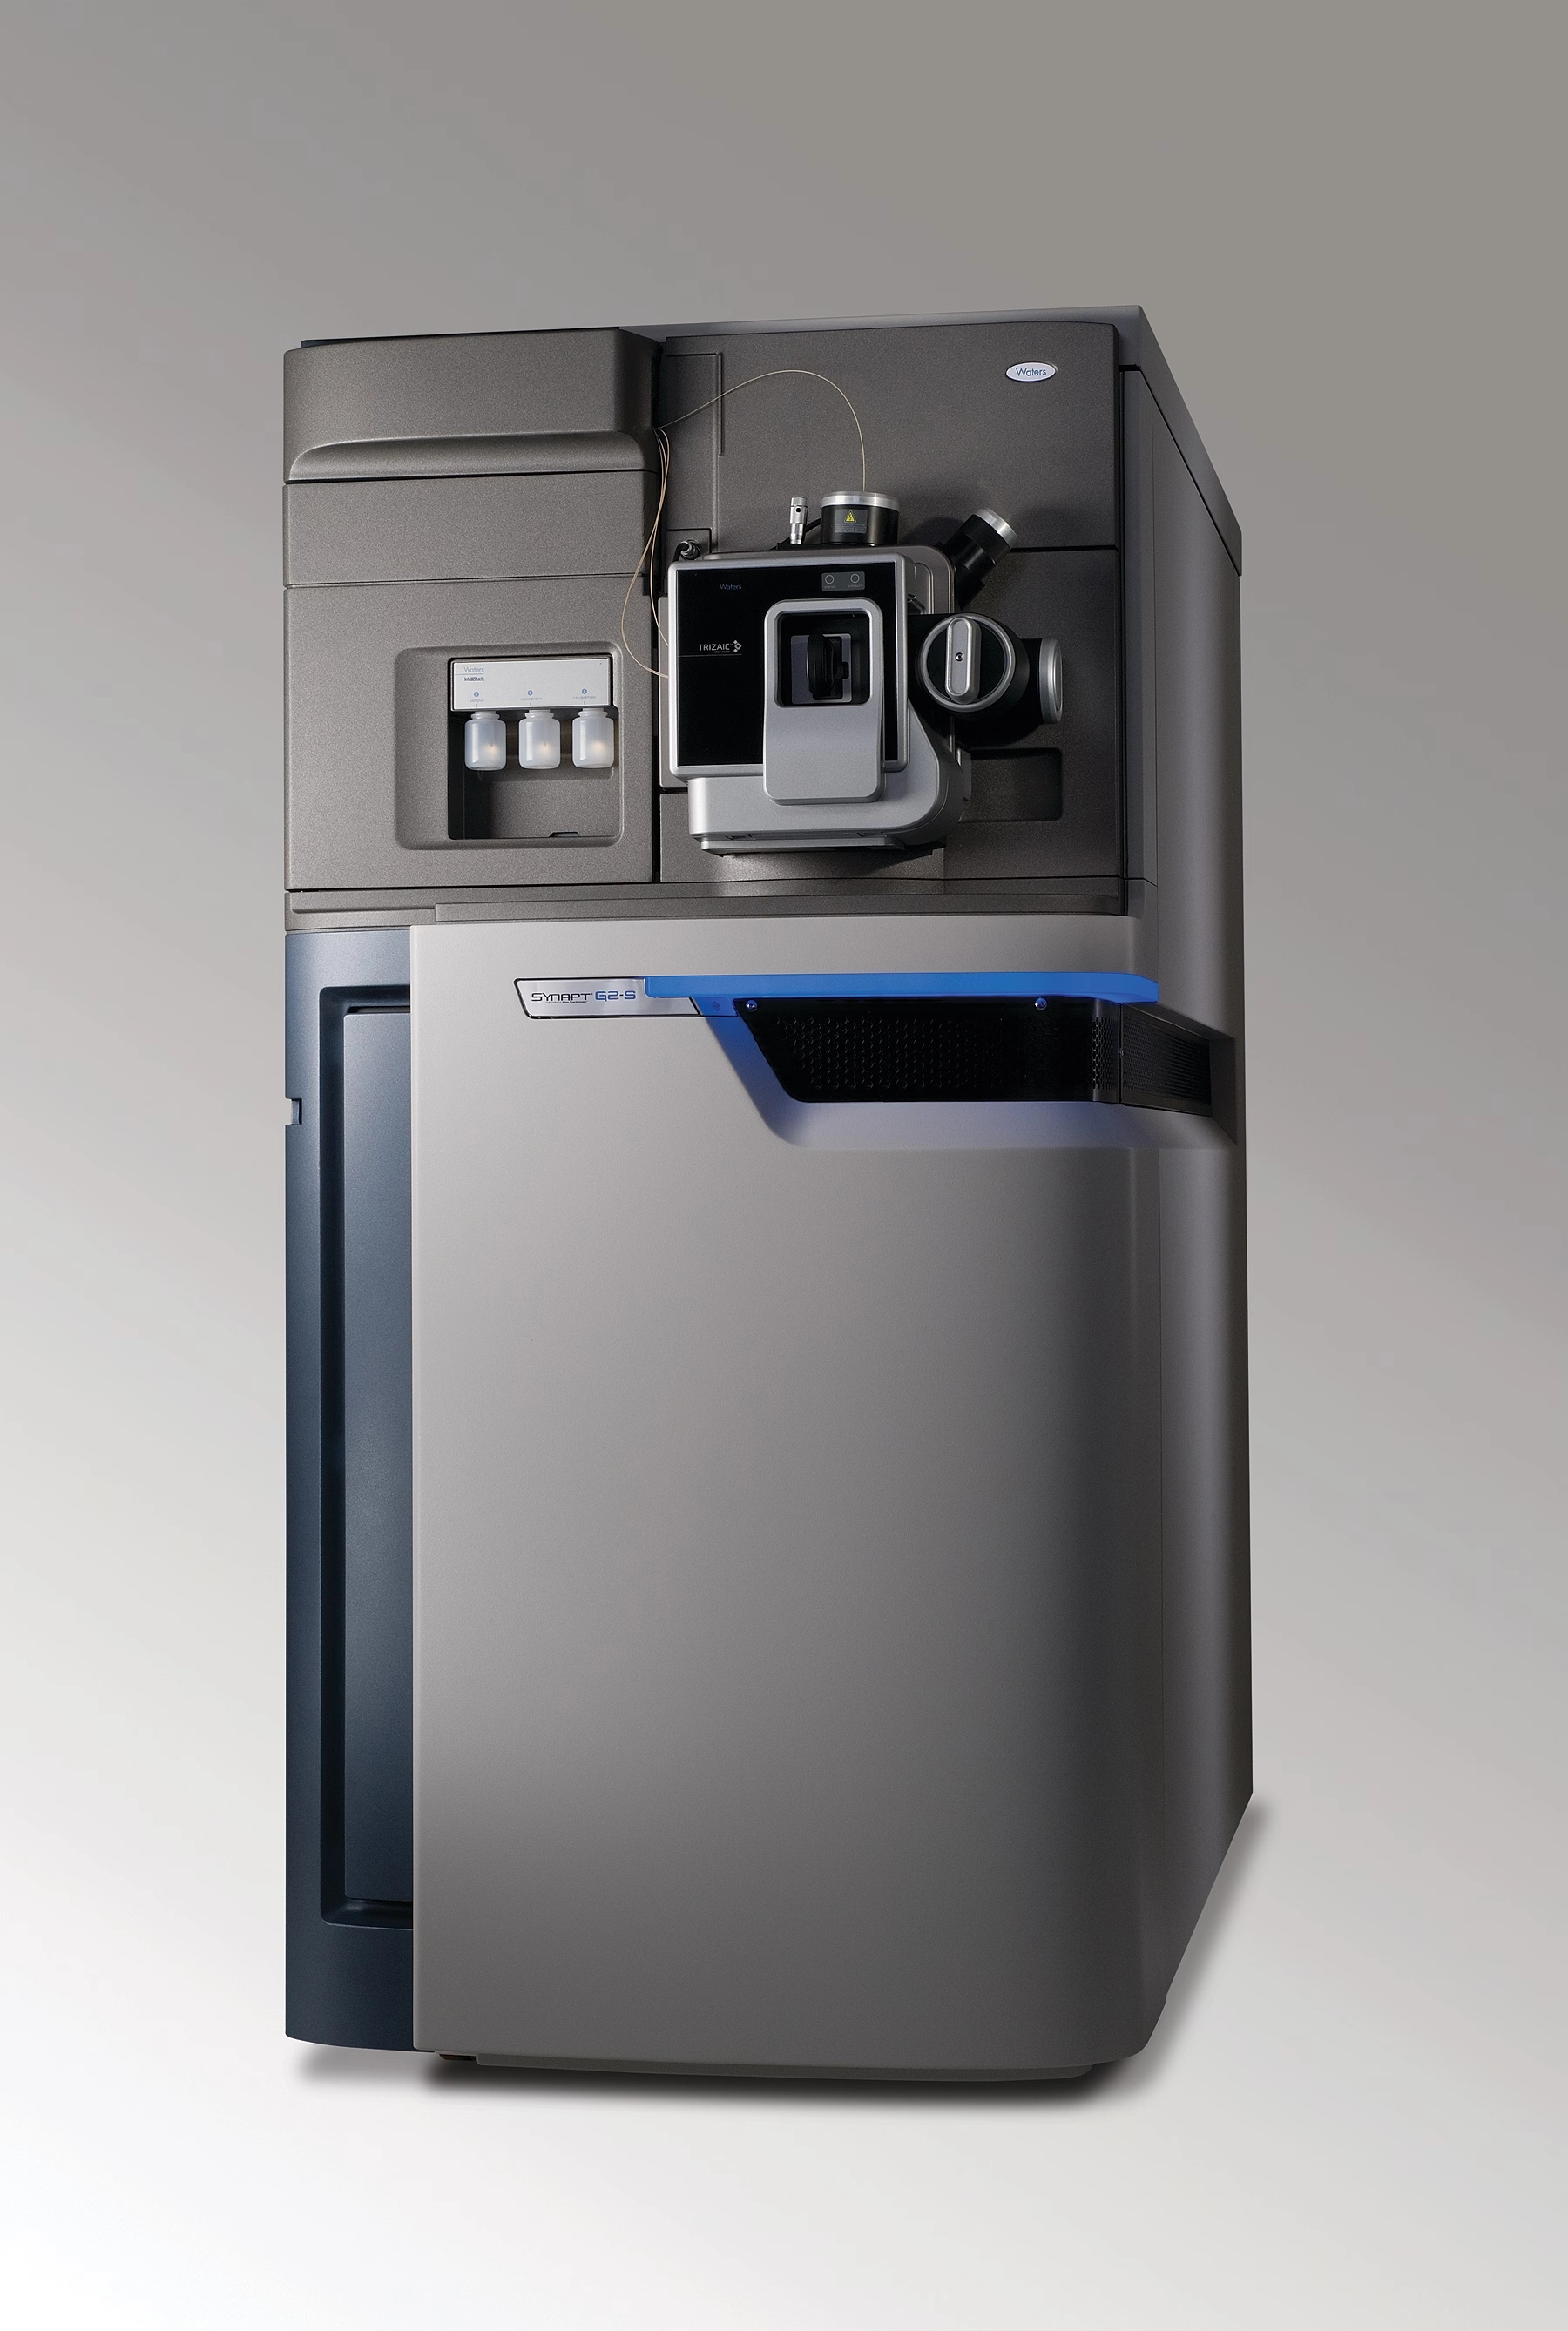 Waters SYNAPT G2-S High Definition Mass Spectrometer